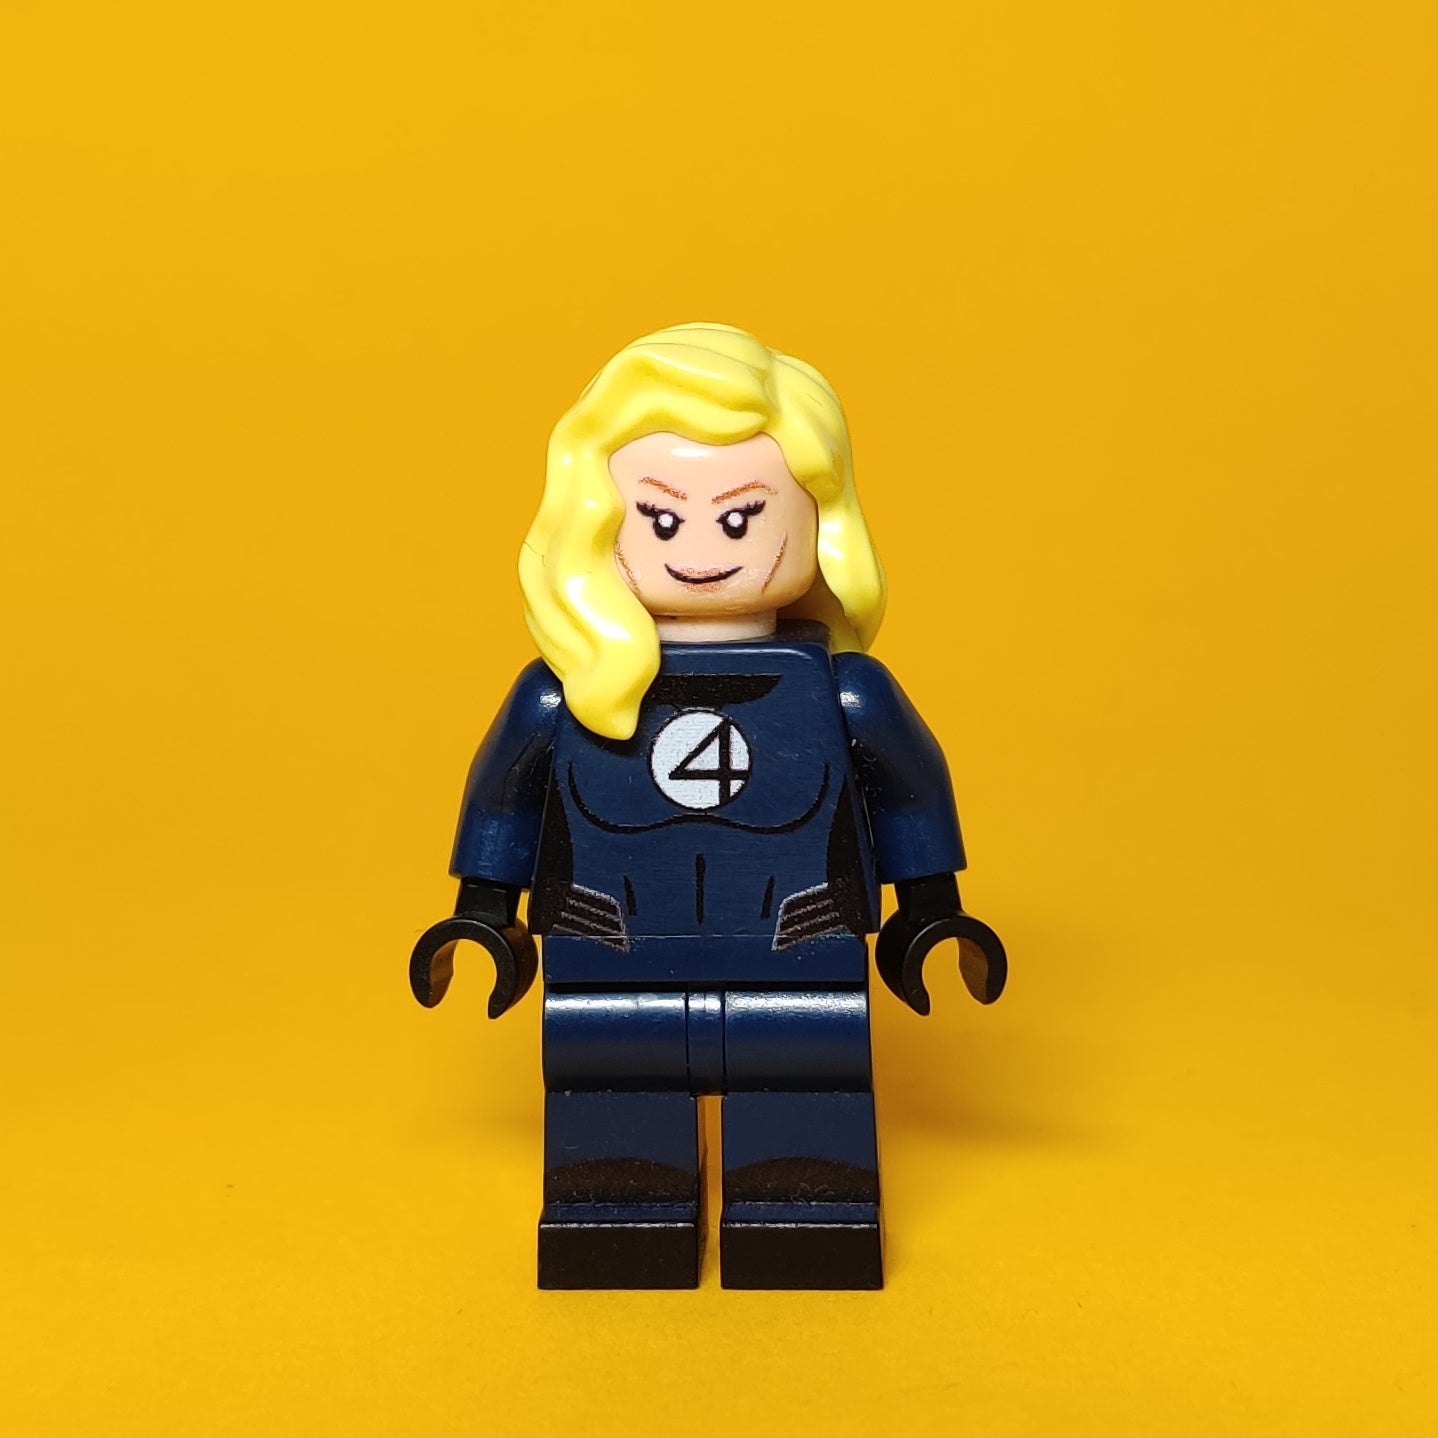 Collection of Limited Edition Printed Minifigures